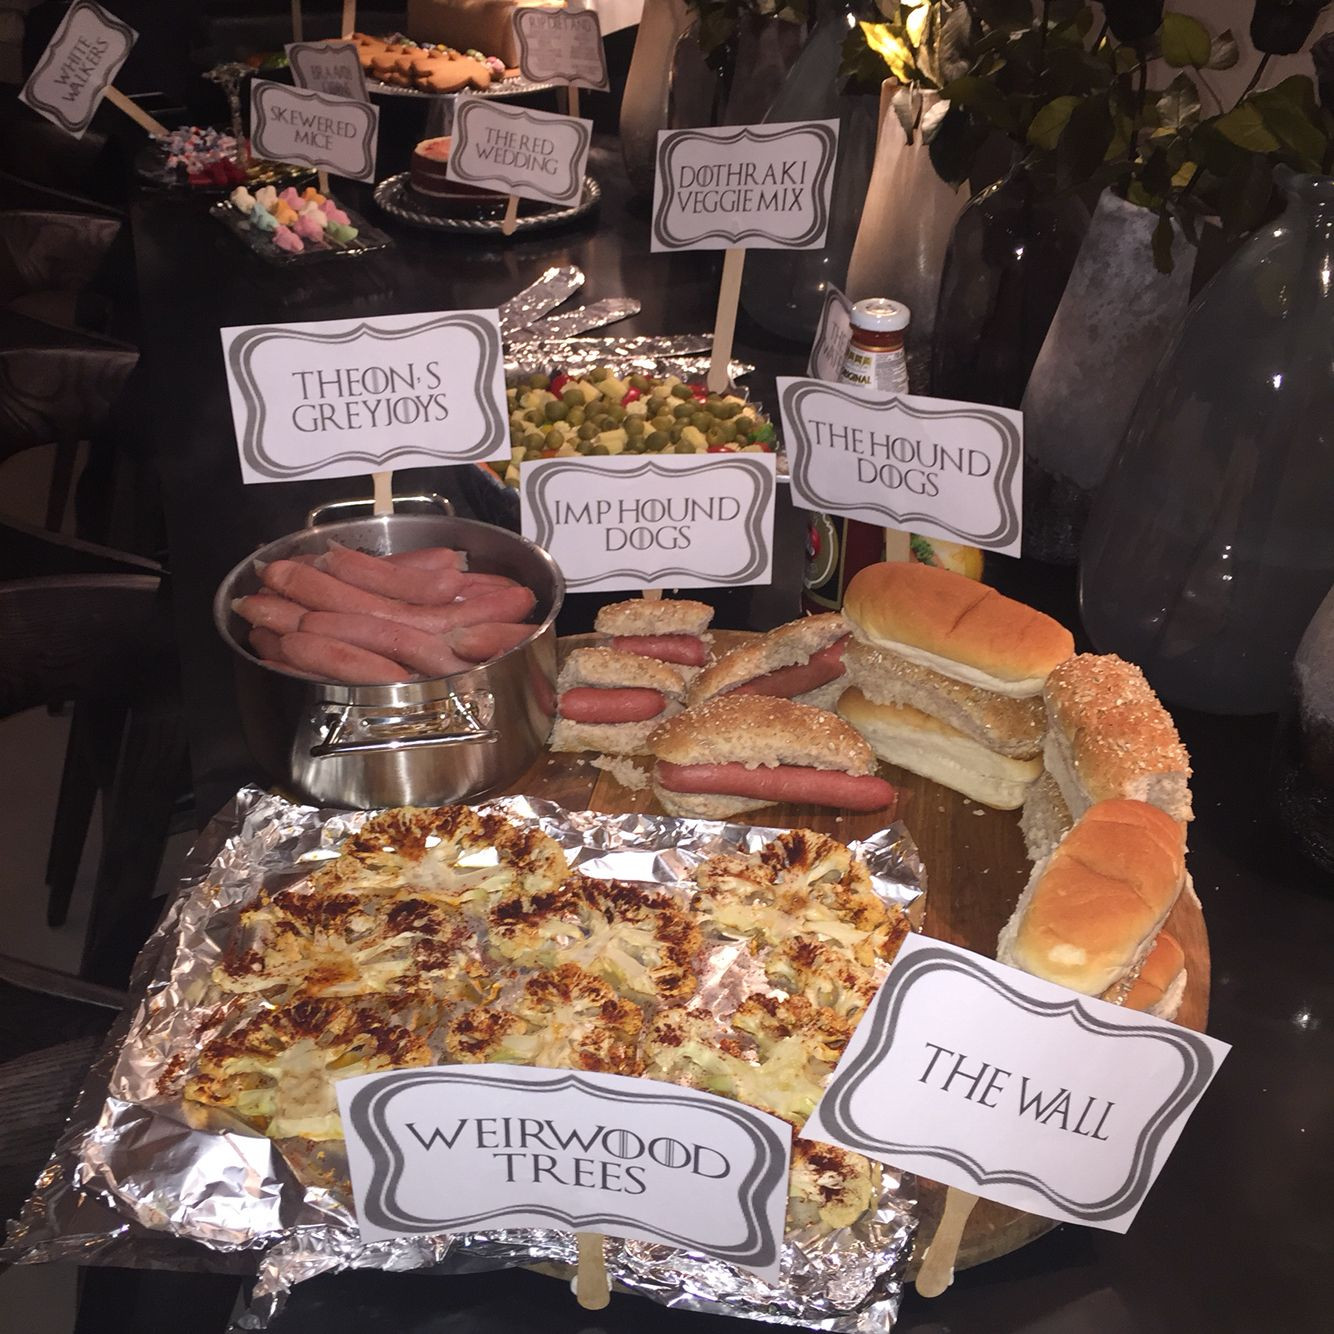 Game Of Thrones Party Food Ideas
 Game of thrones themed dinner party Hound dogs Imp hound